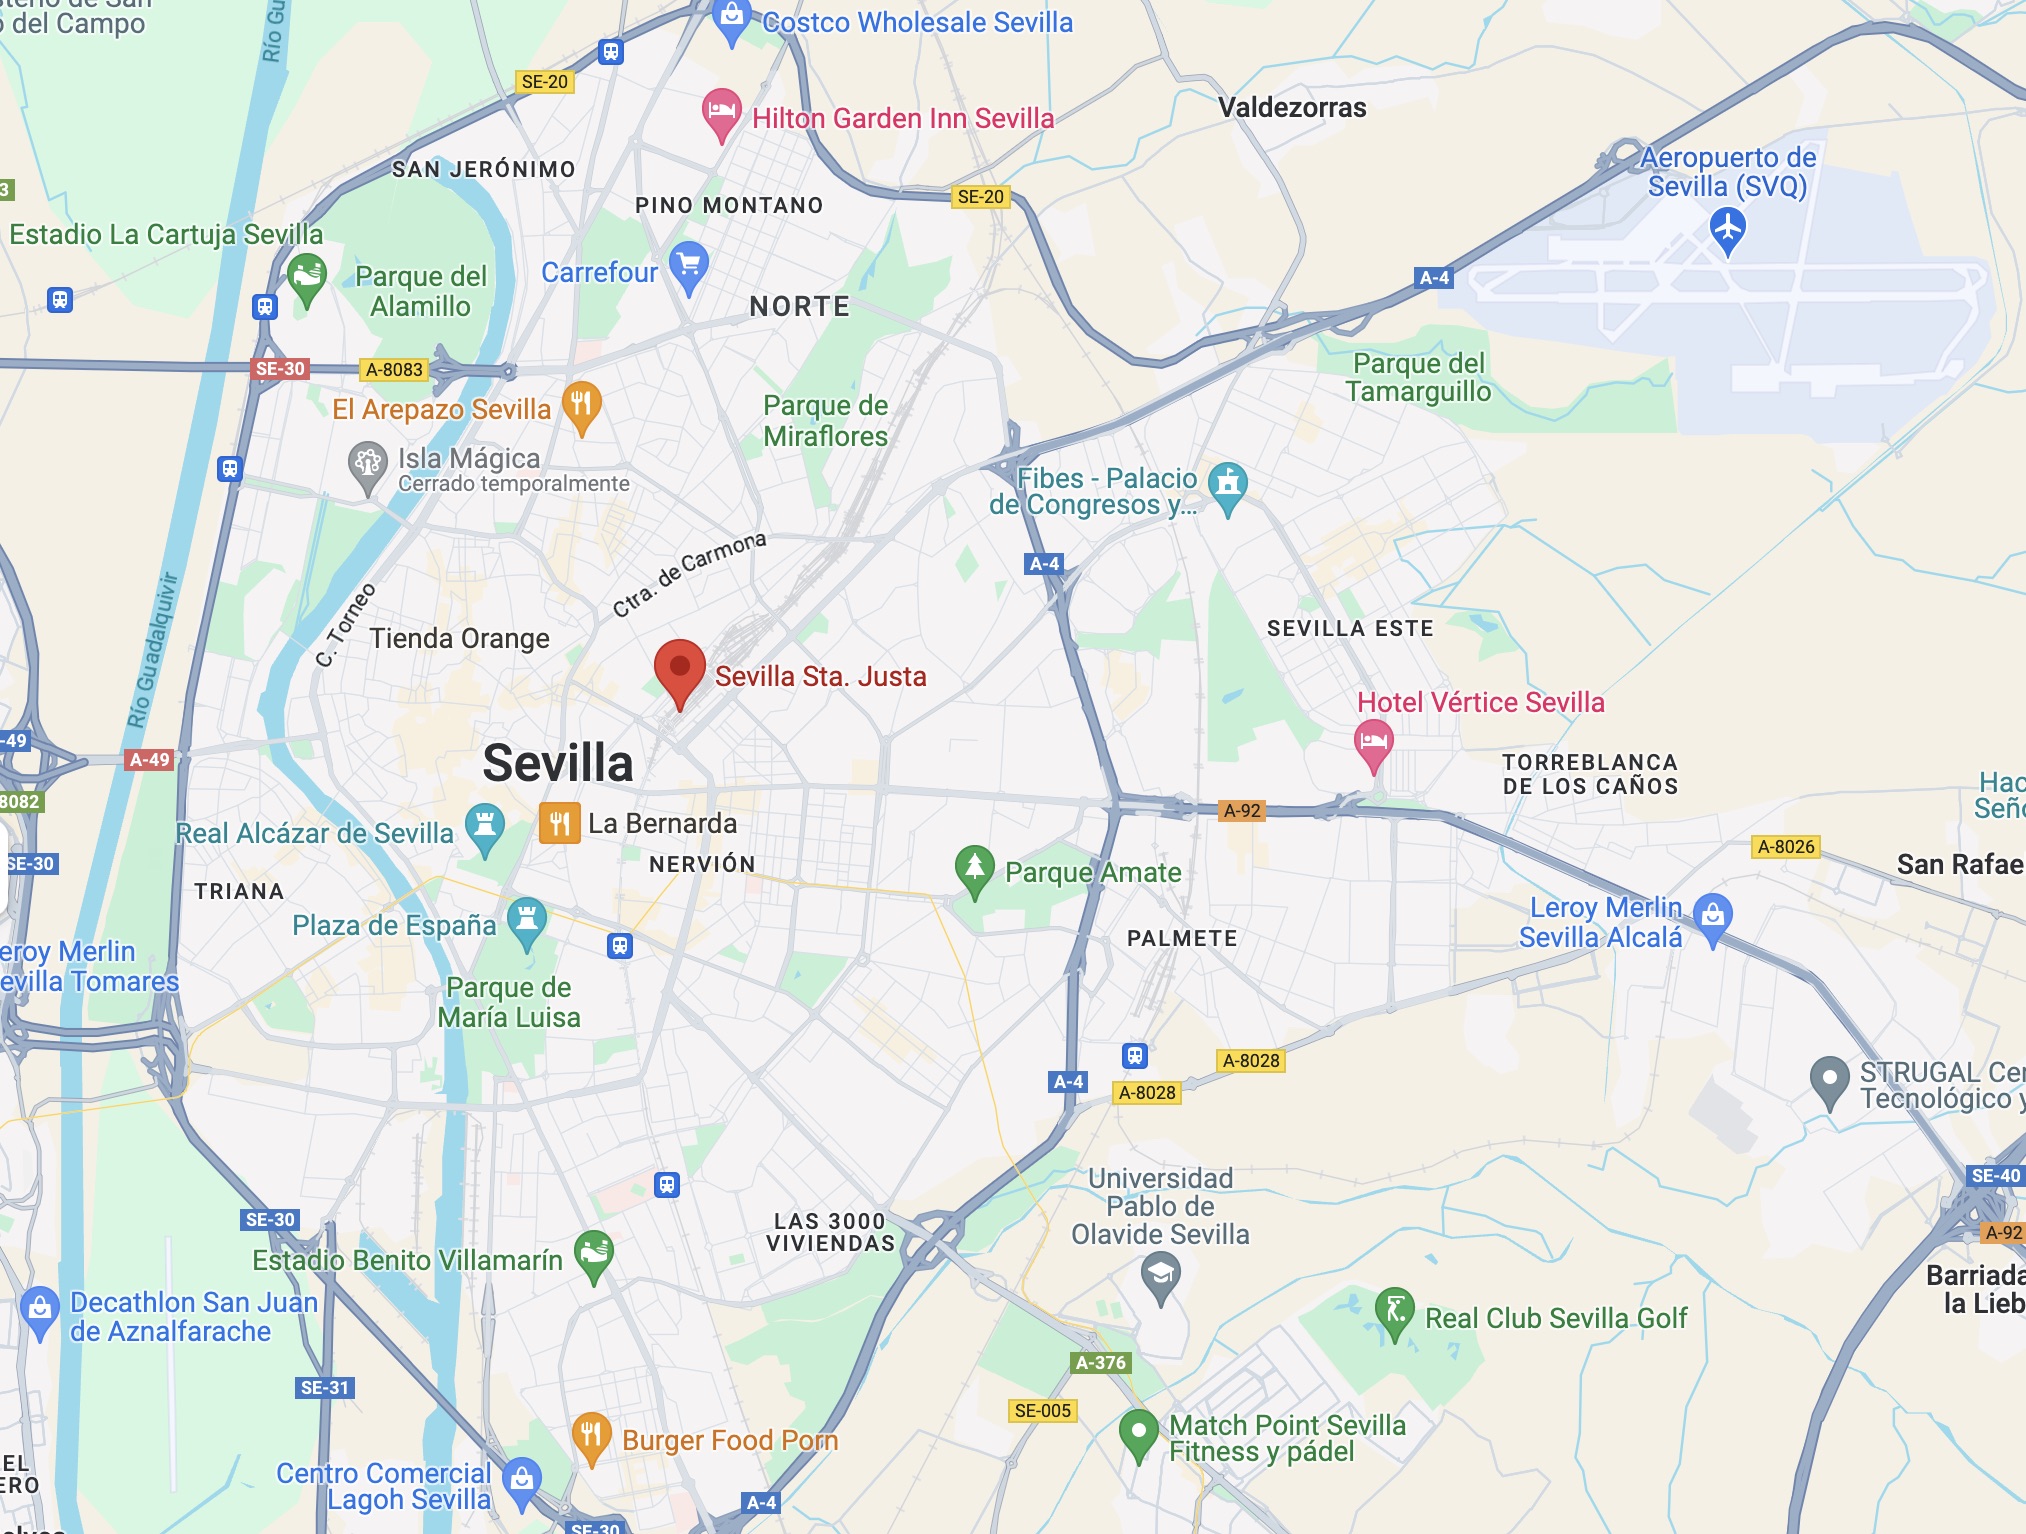 Map with reference to ways to get to Seville